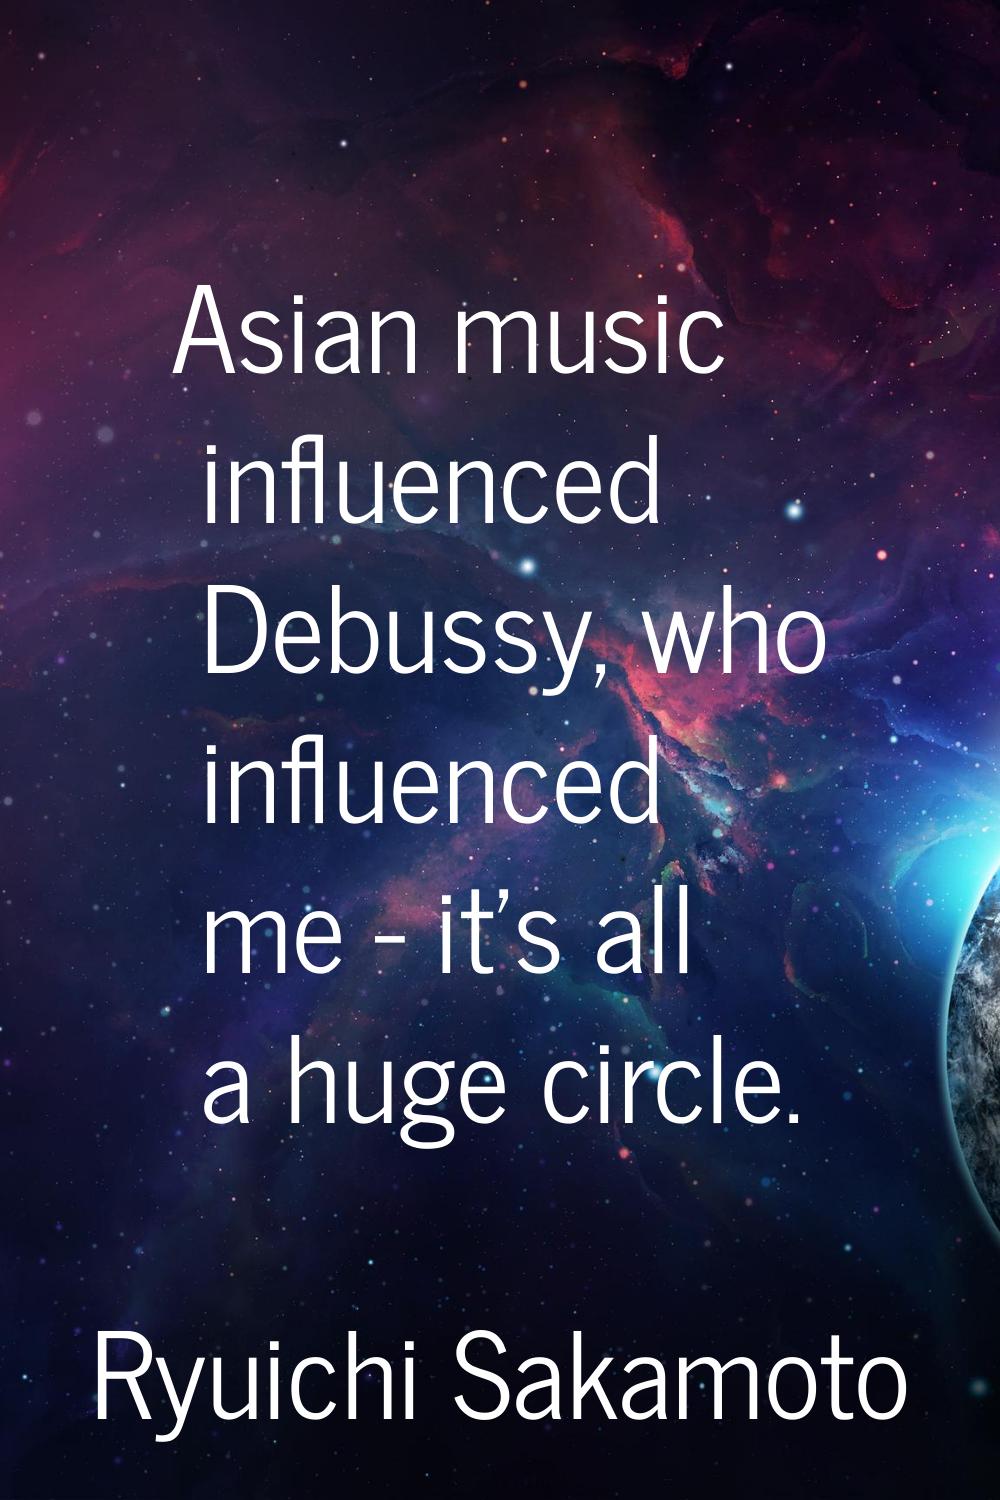 Asian music influenced Debussy, who influenced me - it's all a huge circle.